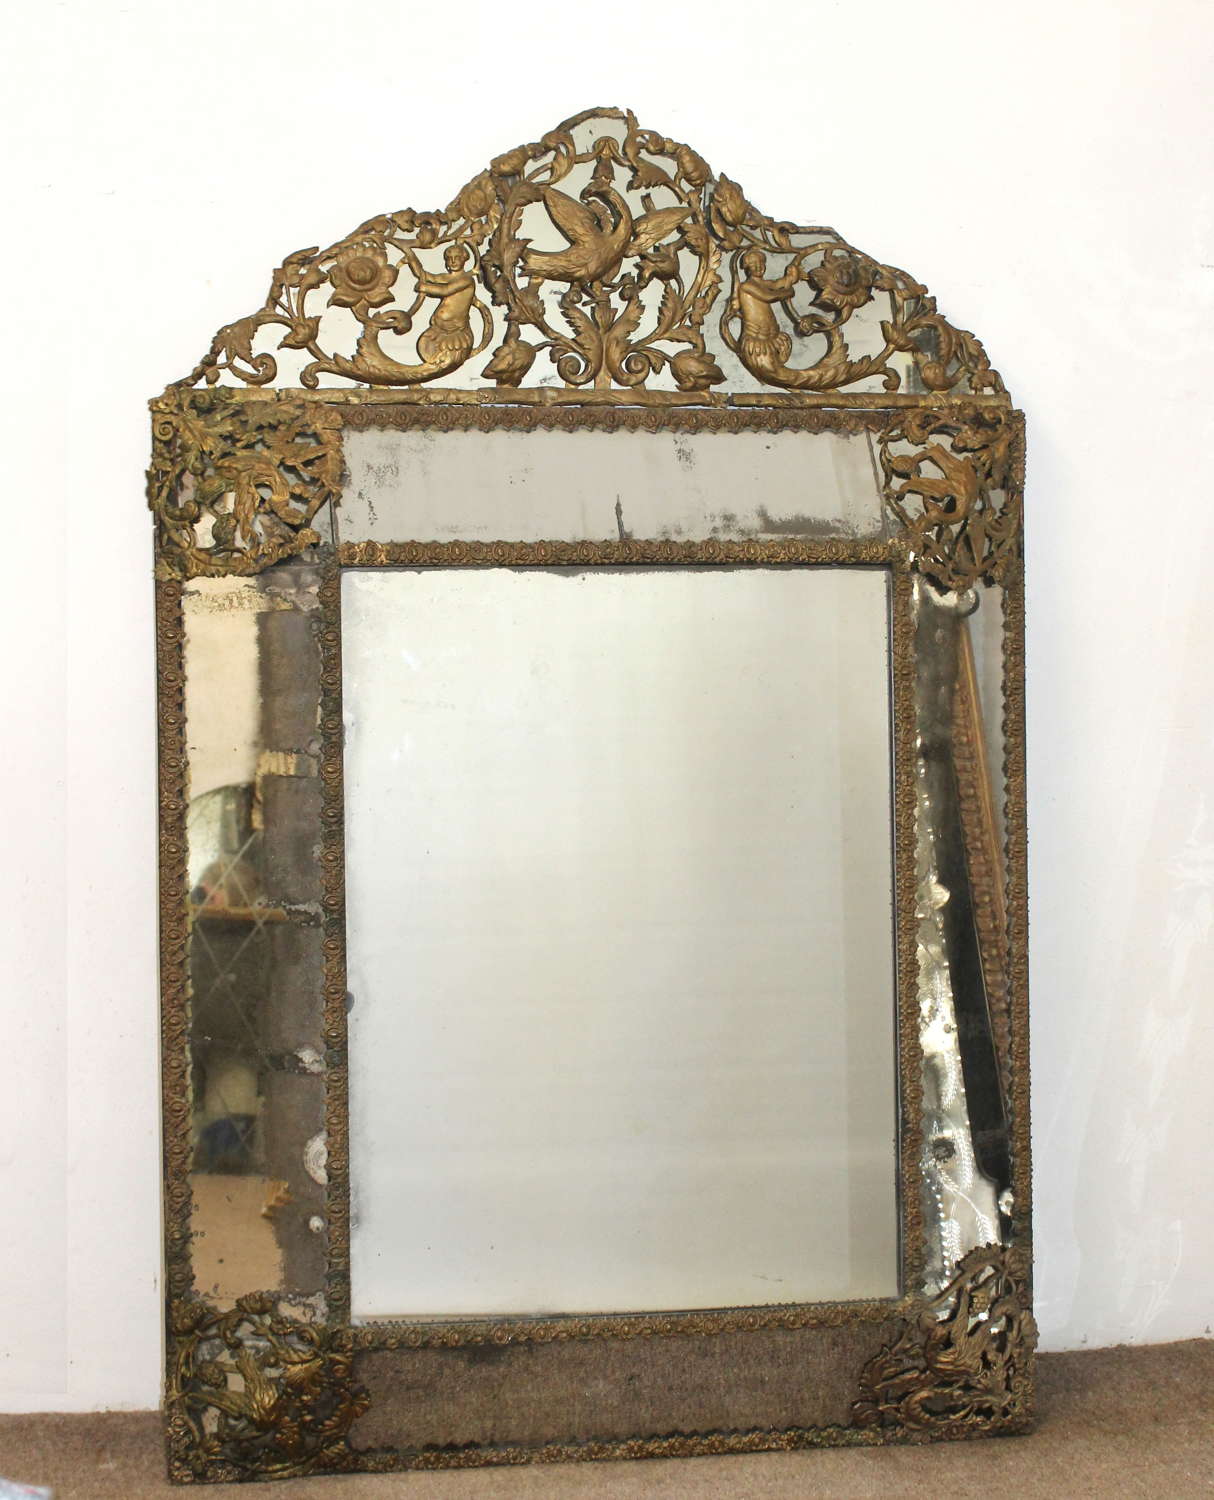 17th century cushioned mirror with gilt metal decoration